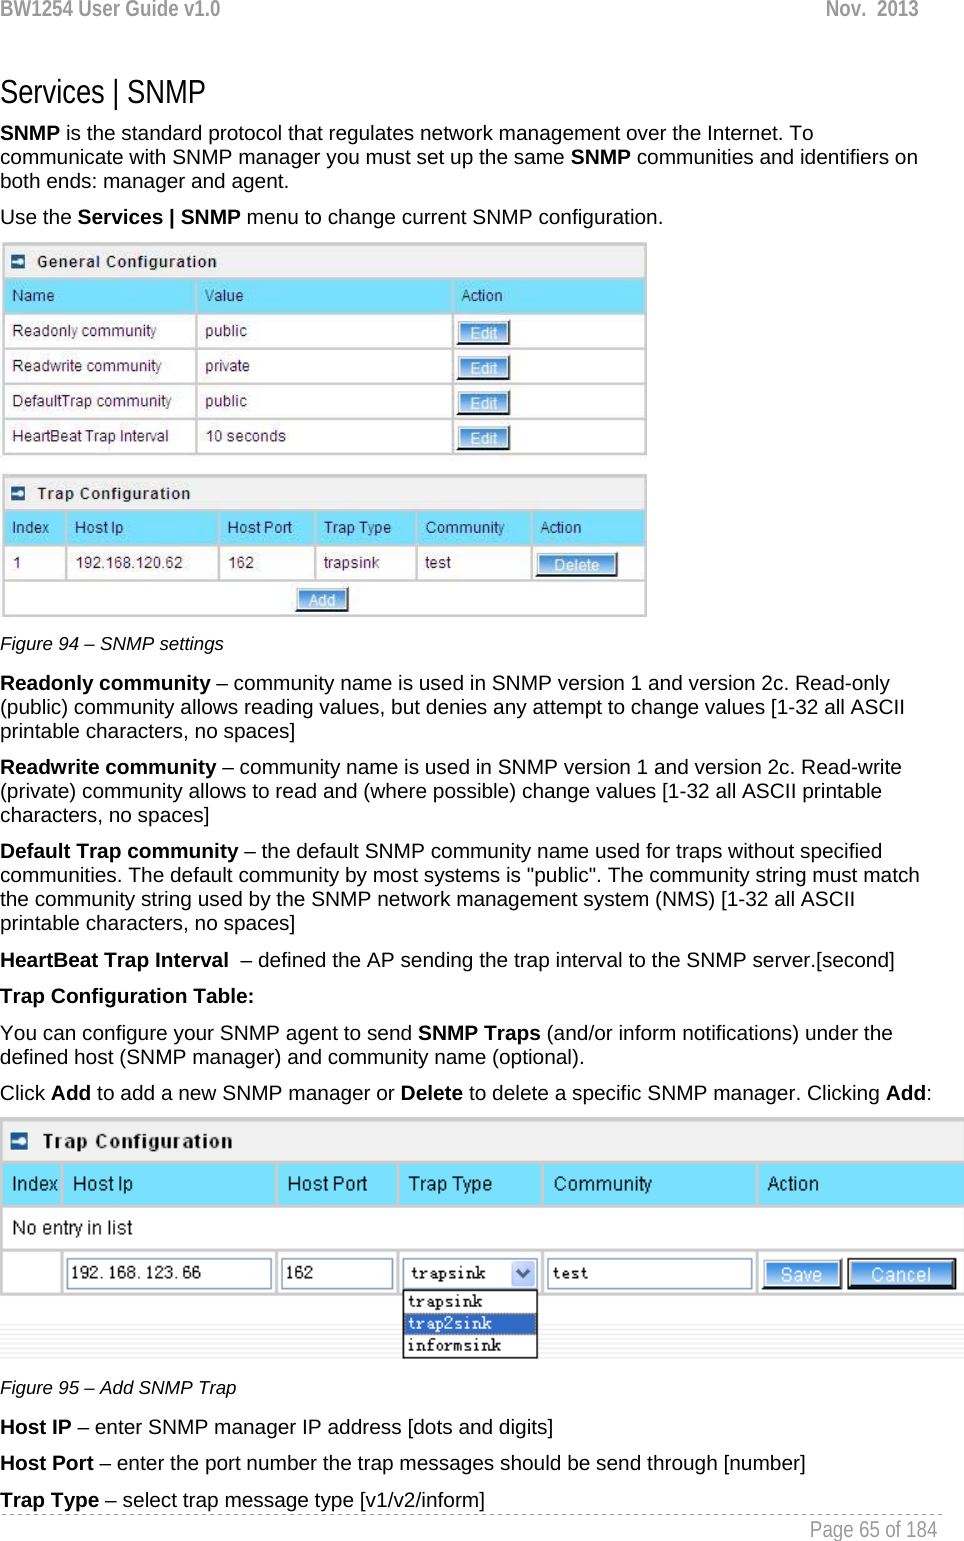 BW1254 User Guide v1.0  Nov.  2013     Page 65 of 184   Services | SNMP SNMP is the standard protocol that regulates network management over the Internet. To communicate with SNMP manager you must set up the same SNMP communities and identifiers on both ends: manager and agent. Use the Services | SNMP menu to change current SNMP configuration.  Figure 94 – SNMP settings Readonly community – community name is used in SNMP version 1 and version 2c. Read-only (public) community allows reading values, but denies any attempt to change values [1-32 all ASCII printable characters, no spaces] Readwrite community – community name is used in SNMP version 1 and version 2c. Read-write (private) community allows to read and (where possible) change values [1-32 all ASCII printable characters, no spaces] Default Trap community – the default SNMP community name used for traps without specified communities. The default community by most systems is &quot;public&quot;. The community string must match the community string used by the SNMP network management system (NMS) [1-32 all ASCII printable characters, no spaces] HeartBeat Trap Interval  – defined the AP sending the trap interval to the SNMP server.[second] Trap Configuration Table: You can configure your SNMP agent to send SNMP Traps (and/or inform notifications) under the defined host (SNMP manager) and community name (optional). Click Add to add a new SNMP manager or Delete to delete a specific SNMP manager. Clicking Add:  Figure 95 – Add SNMP Trap Host IP – enter SNMP manager IP address [dots and digits] Host Port – enter the port number the trap messages should be send through [number] Trap Type – select trap message type [v1/v2/inform] 